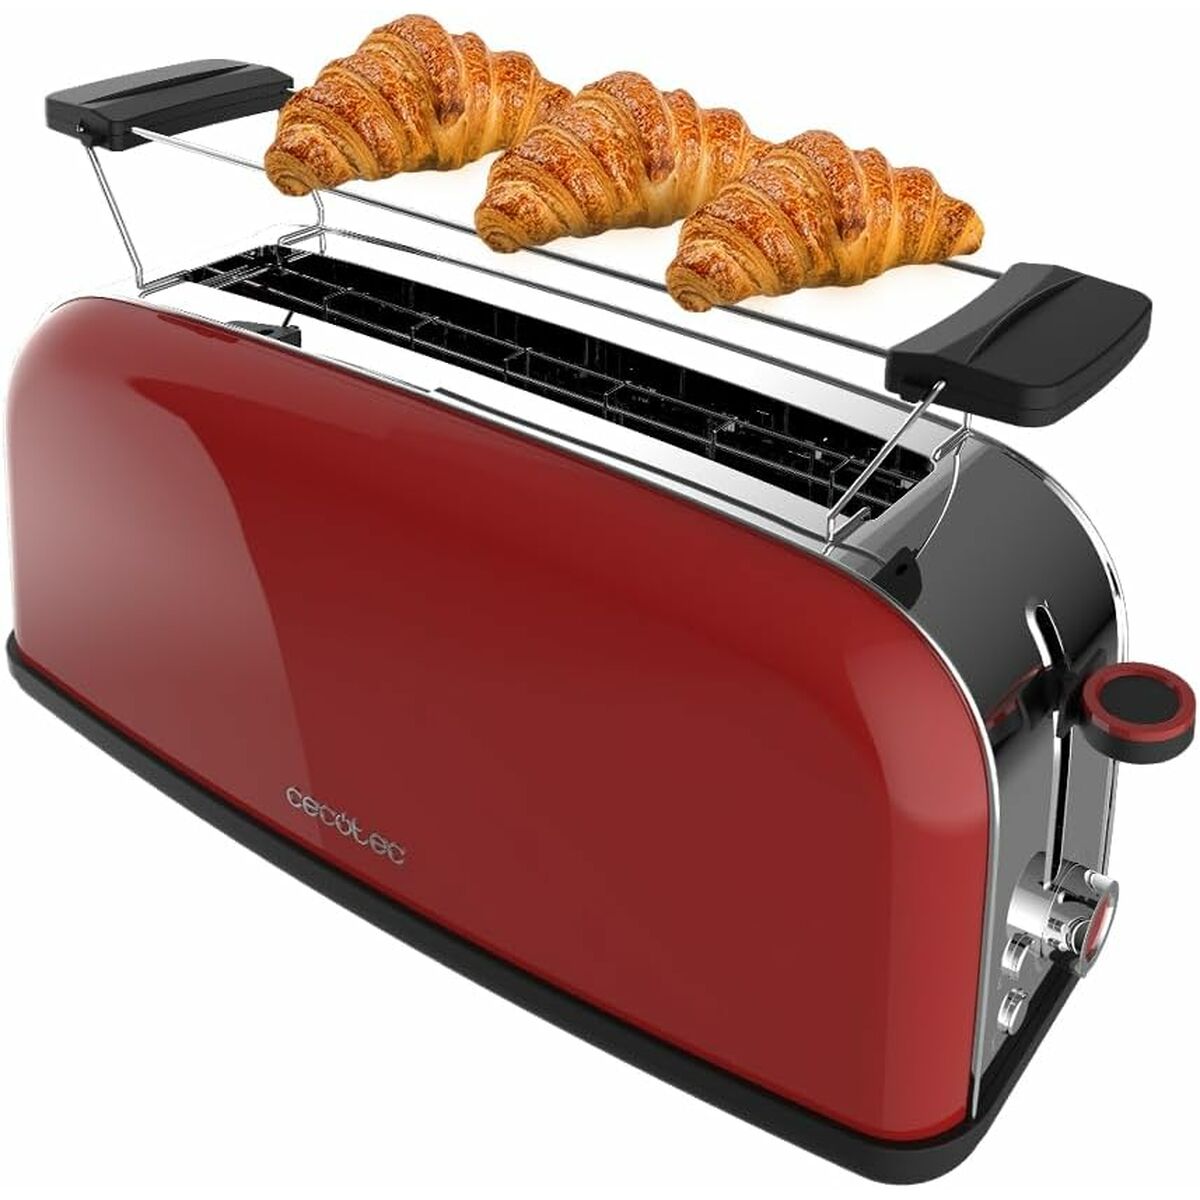 Toaster Cecotec Toastin' time 850 Red Long 850 W - CA International  